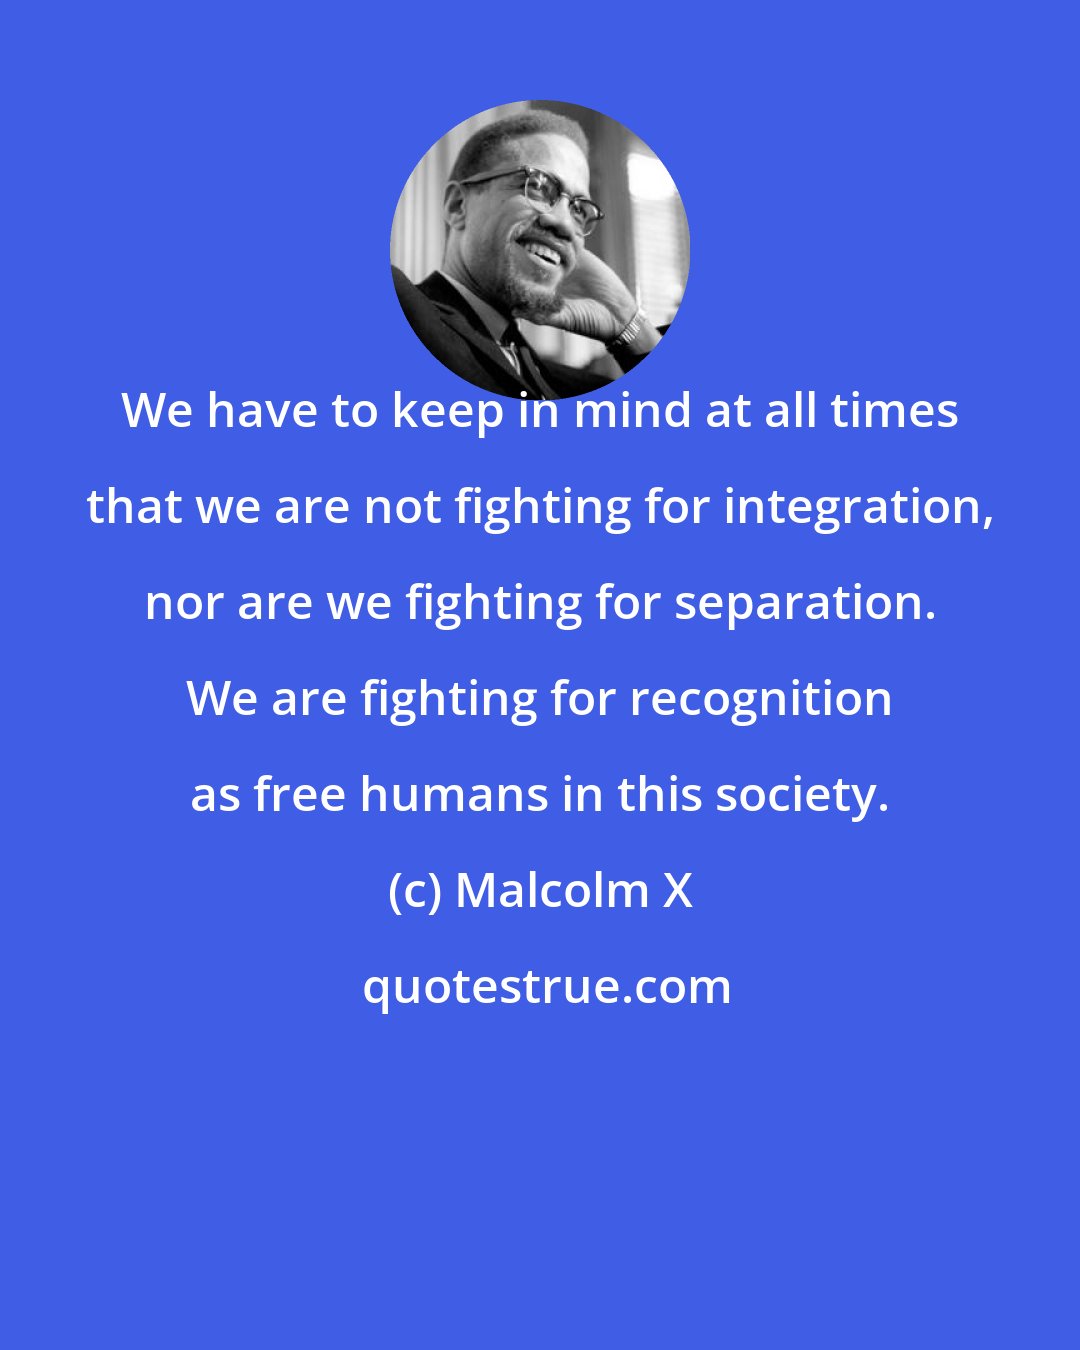 Malcolm X: We have to keep in mind at all times that we are not fighting for integration, nor are we fighting for separation. We are fighting for recognition as free humans in this society.